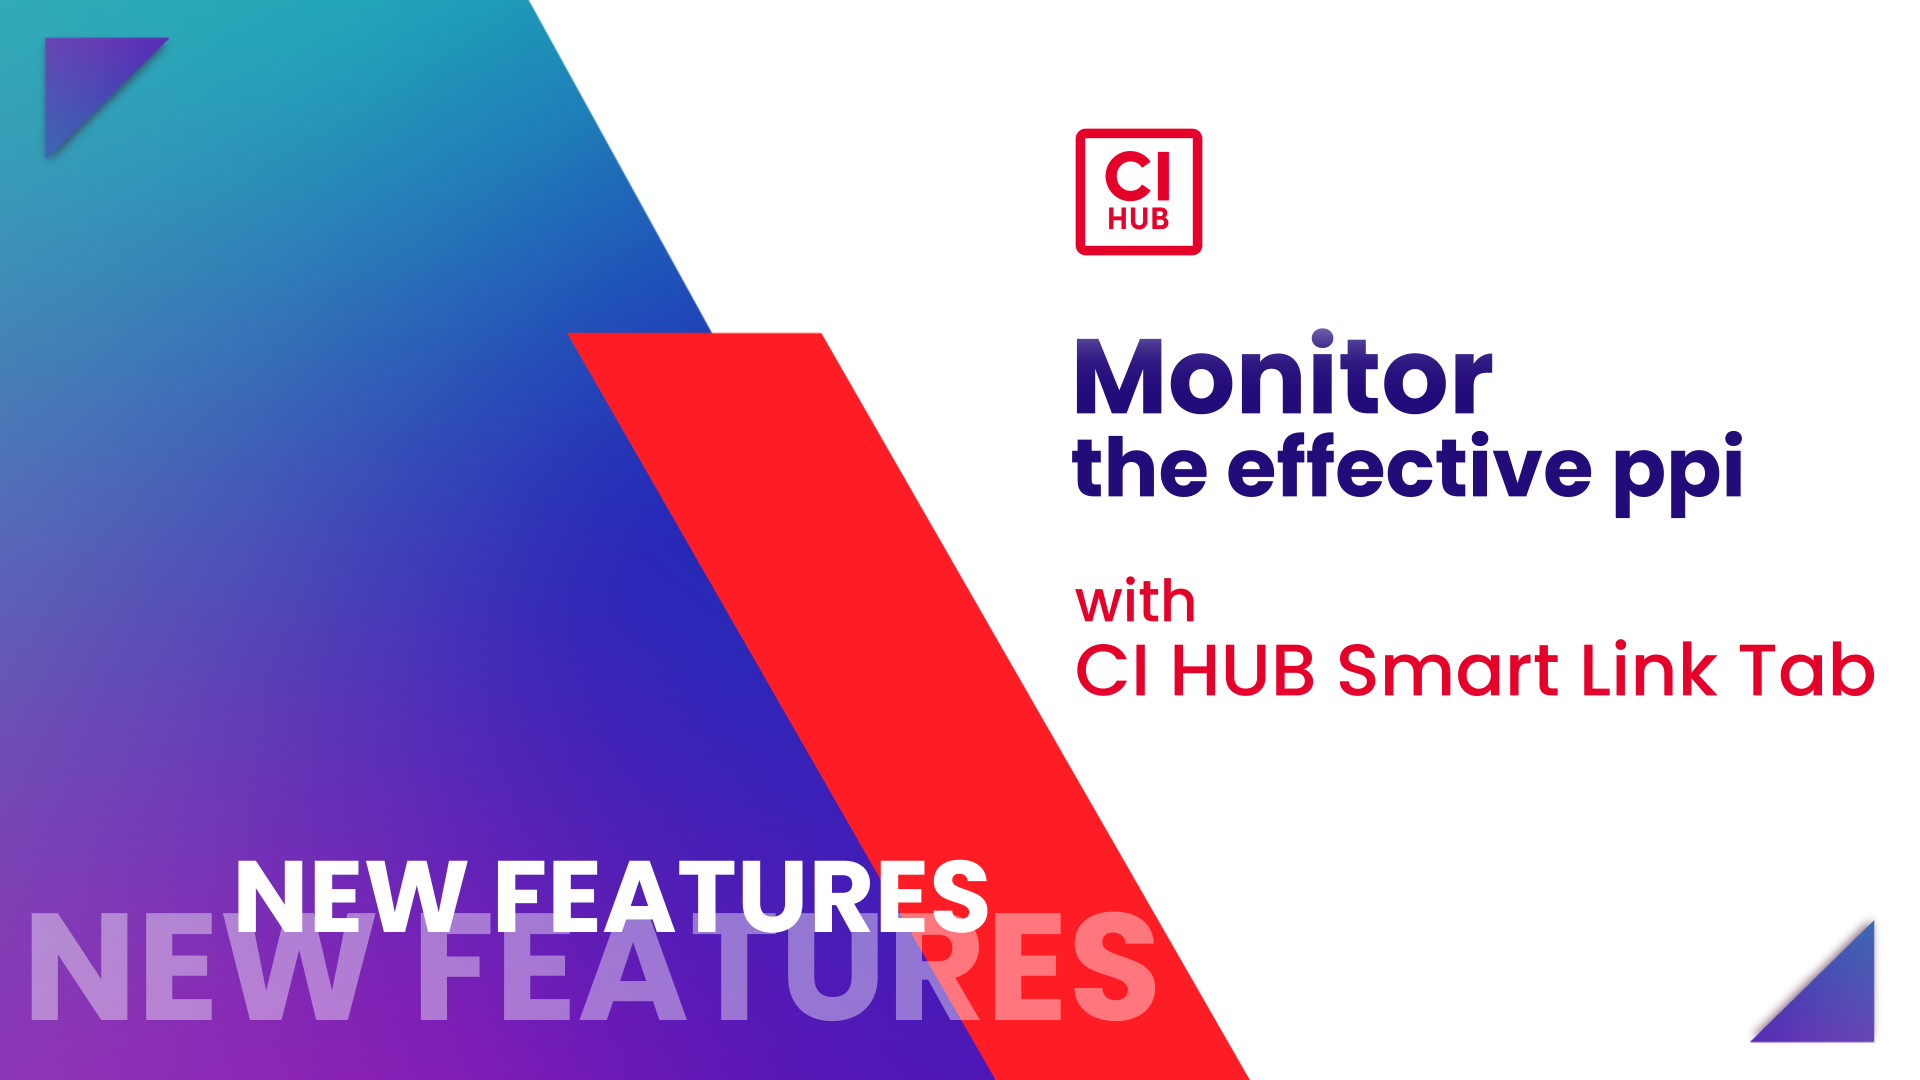 CI HUB Feature Shorty: Monitor the effective ppi